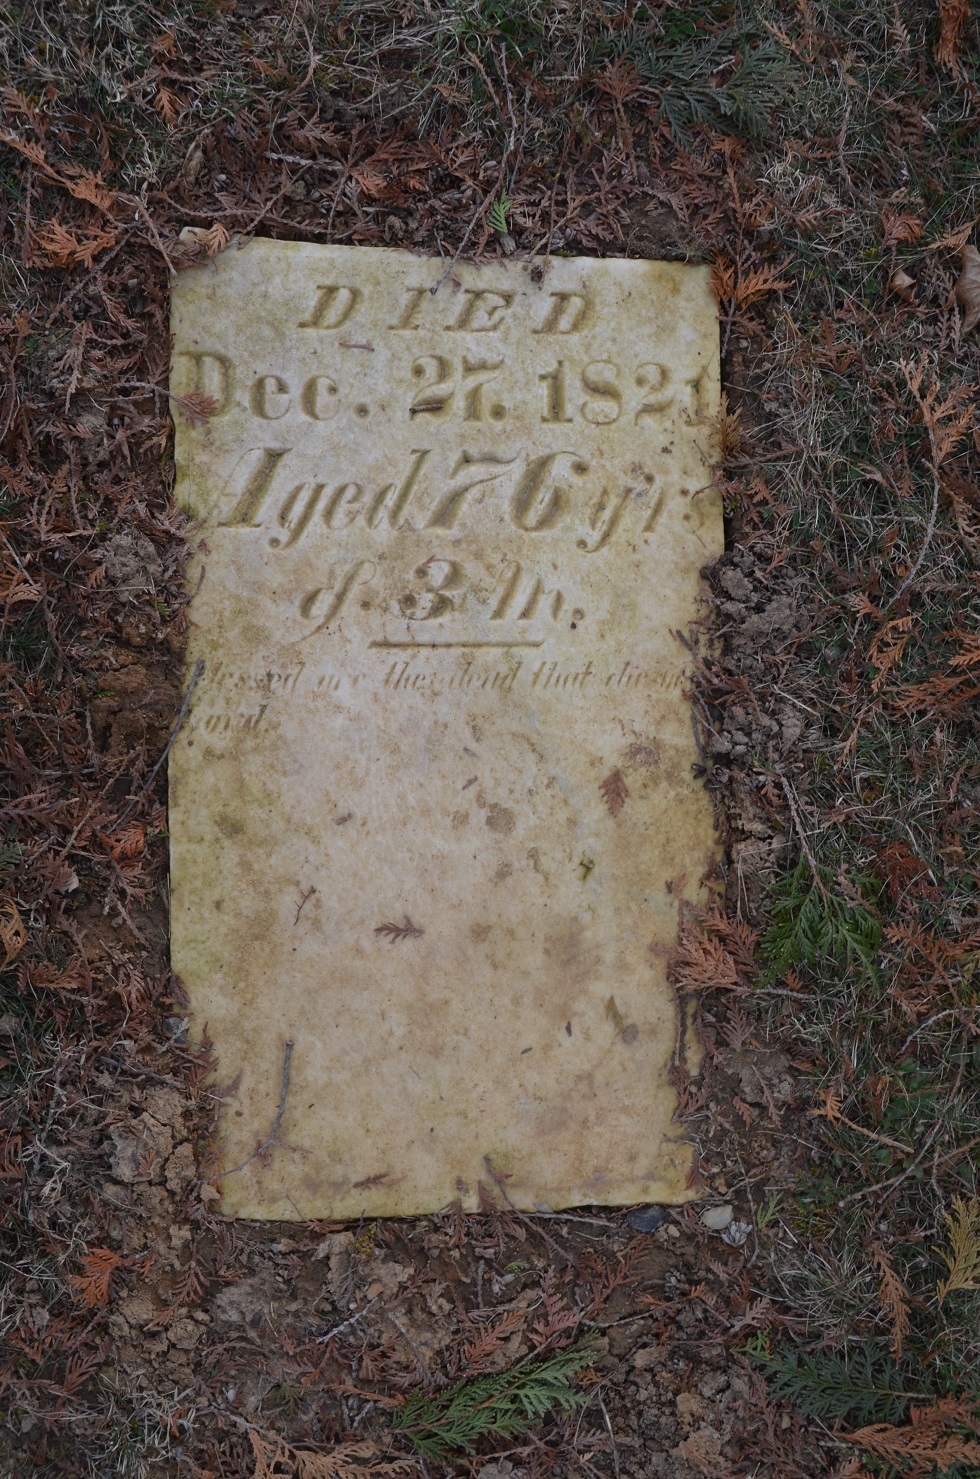 Mathew John  Ball: What is believed to be Mathew's headstone - posted by MarlaSue on findagrave.com